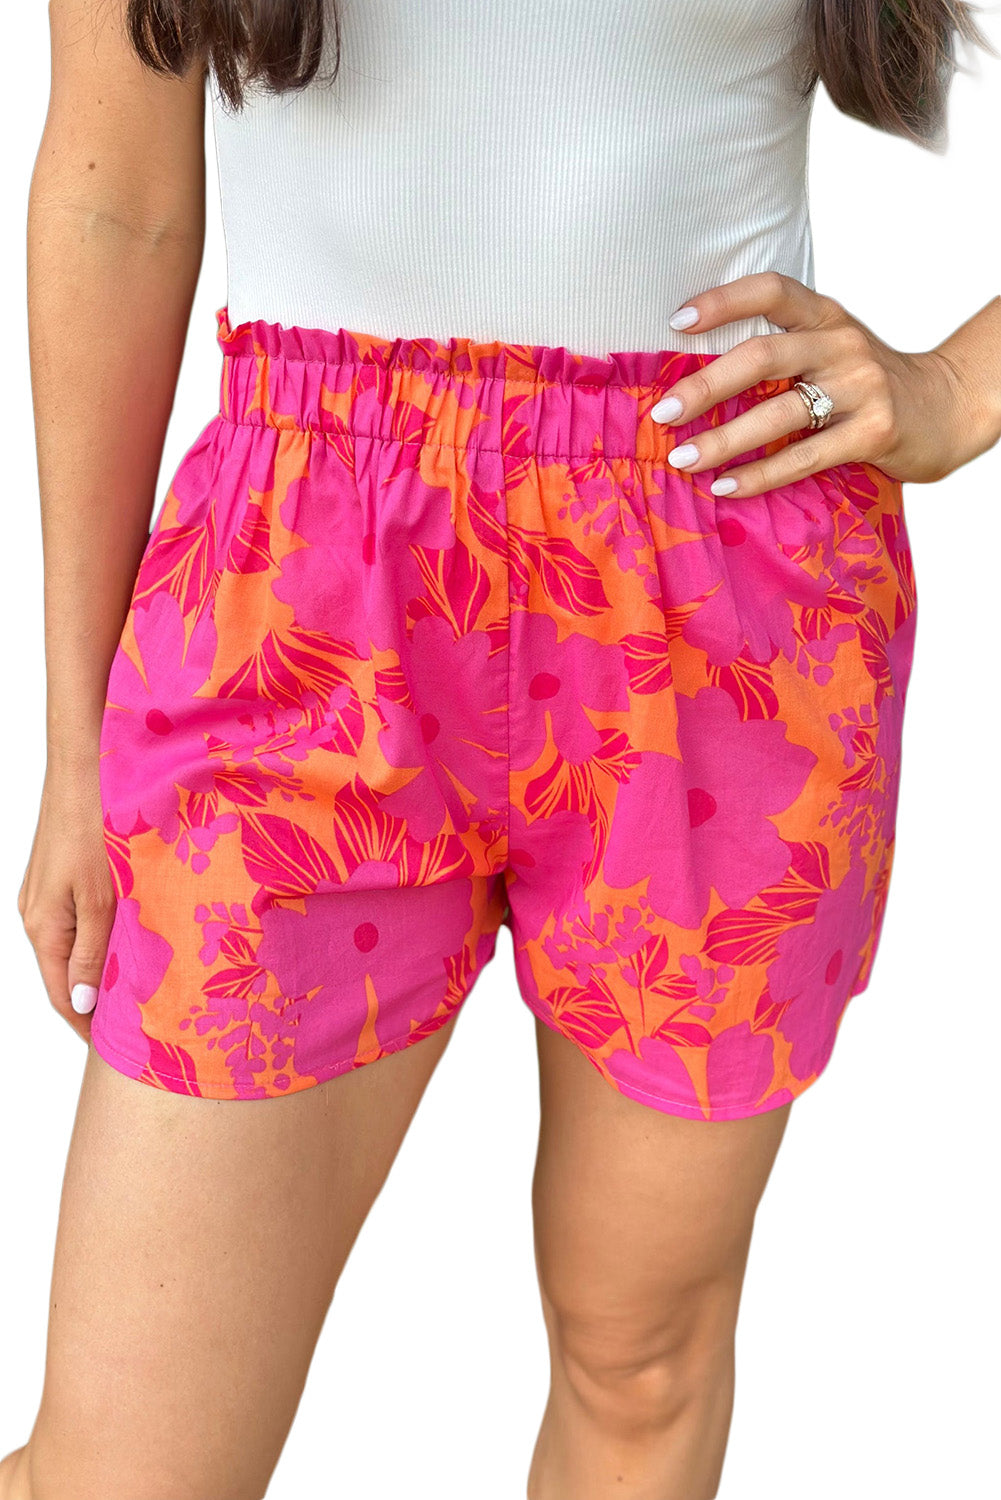 LC731419-10-S, LC731419-10-M, LC731419-10-L, LC731419-10-XL, Pink Floral Print Smocked Waist Shorts